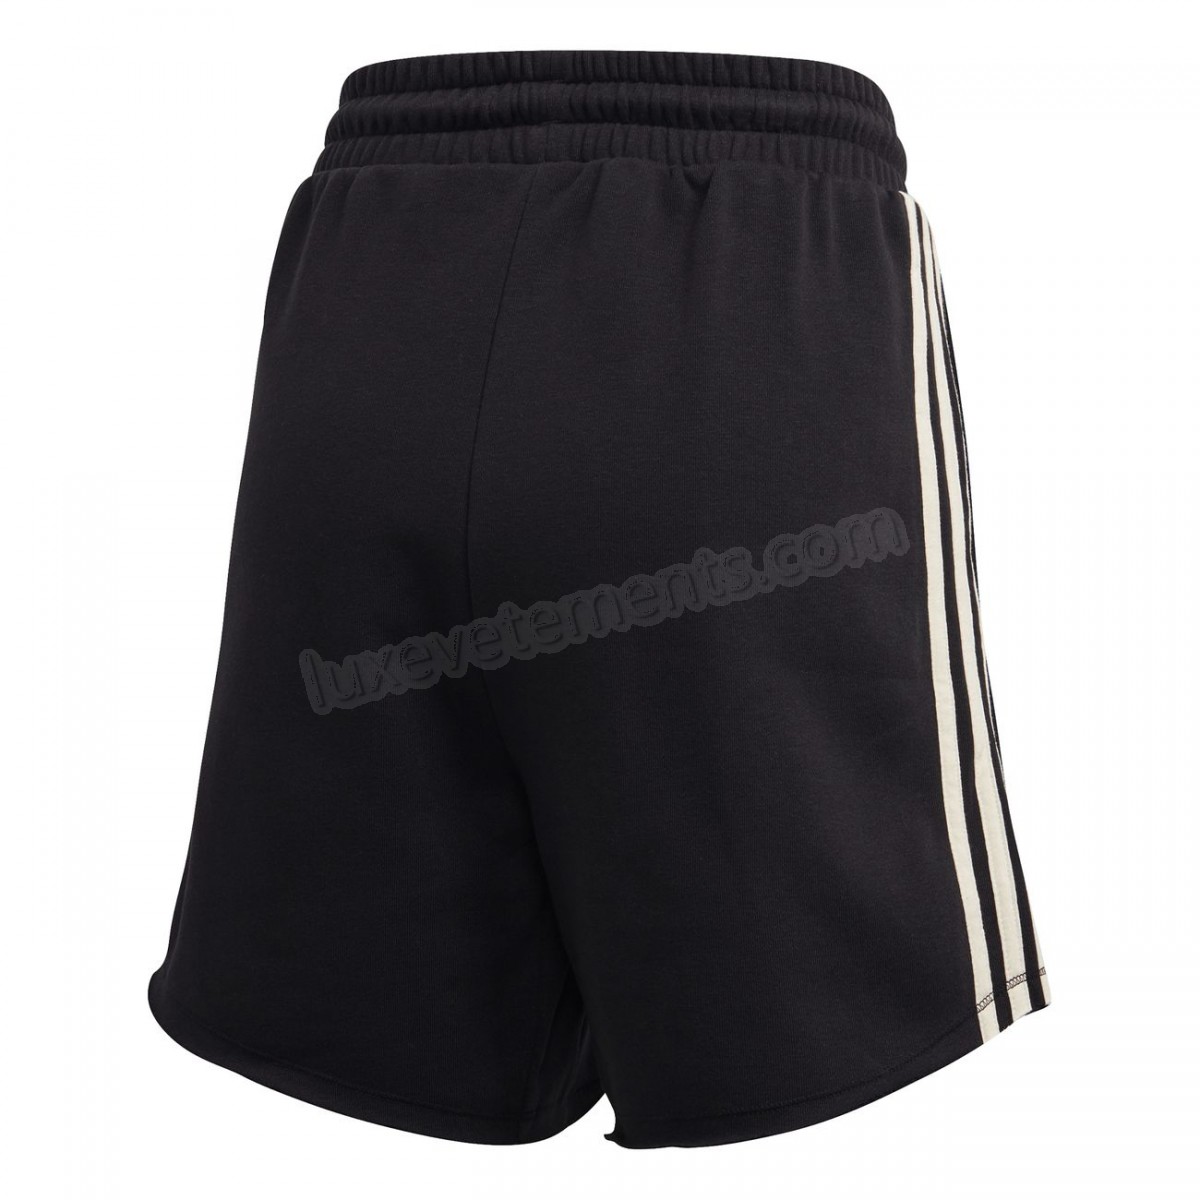 Adidas-Fitness femme ADIDAS Short femme adidas Must Haves Recycled Cotton Vente en ligne - -7